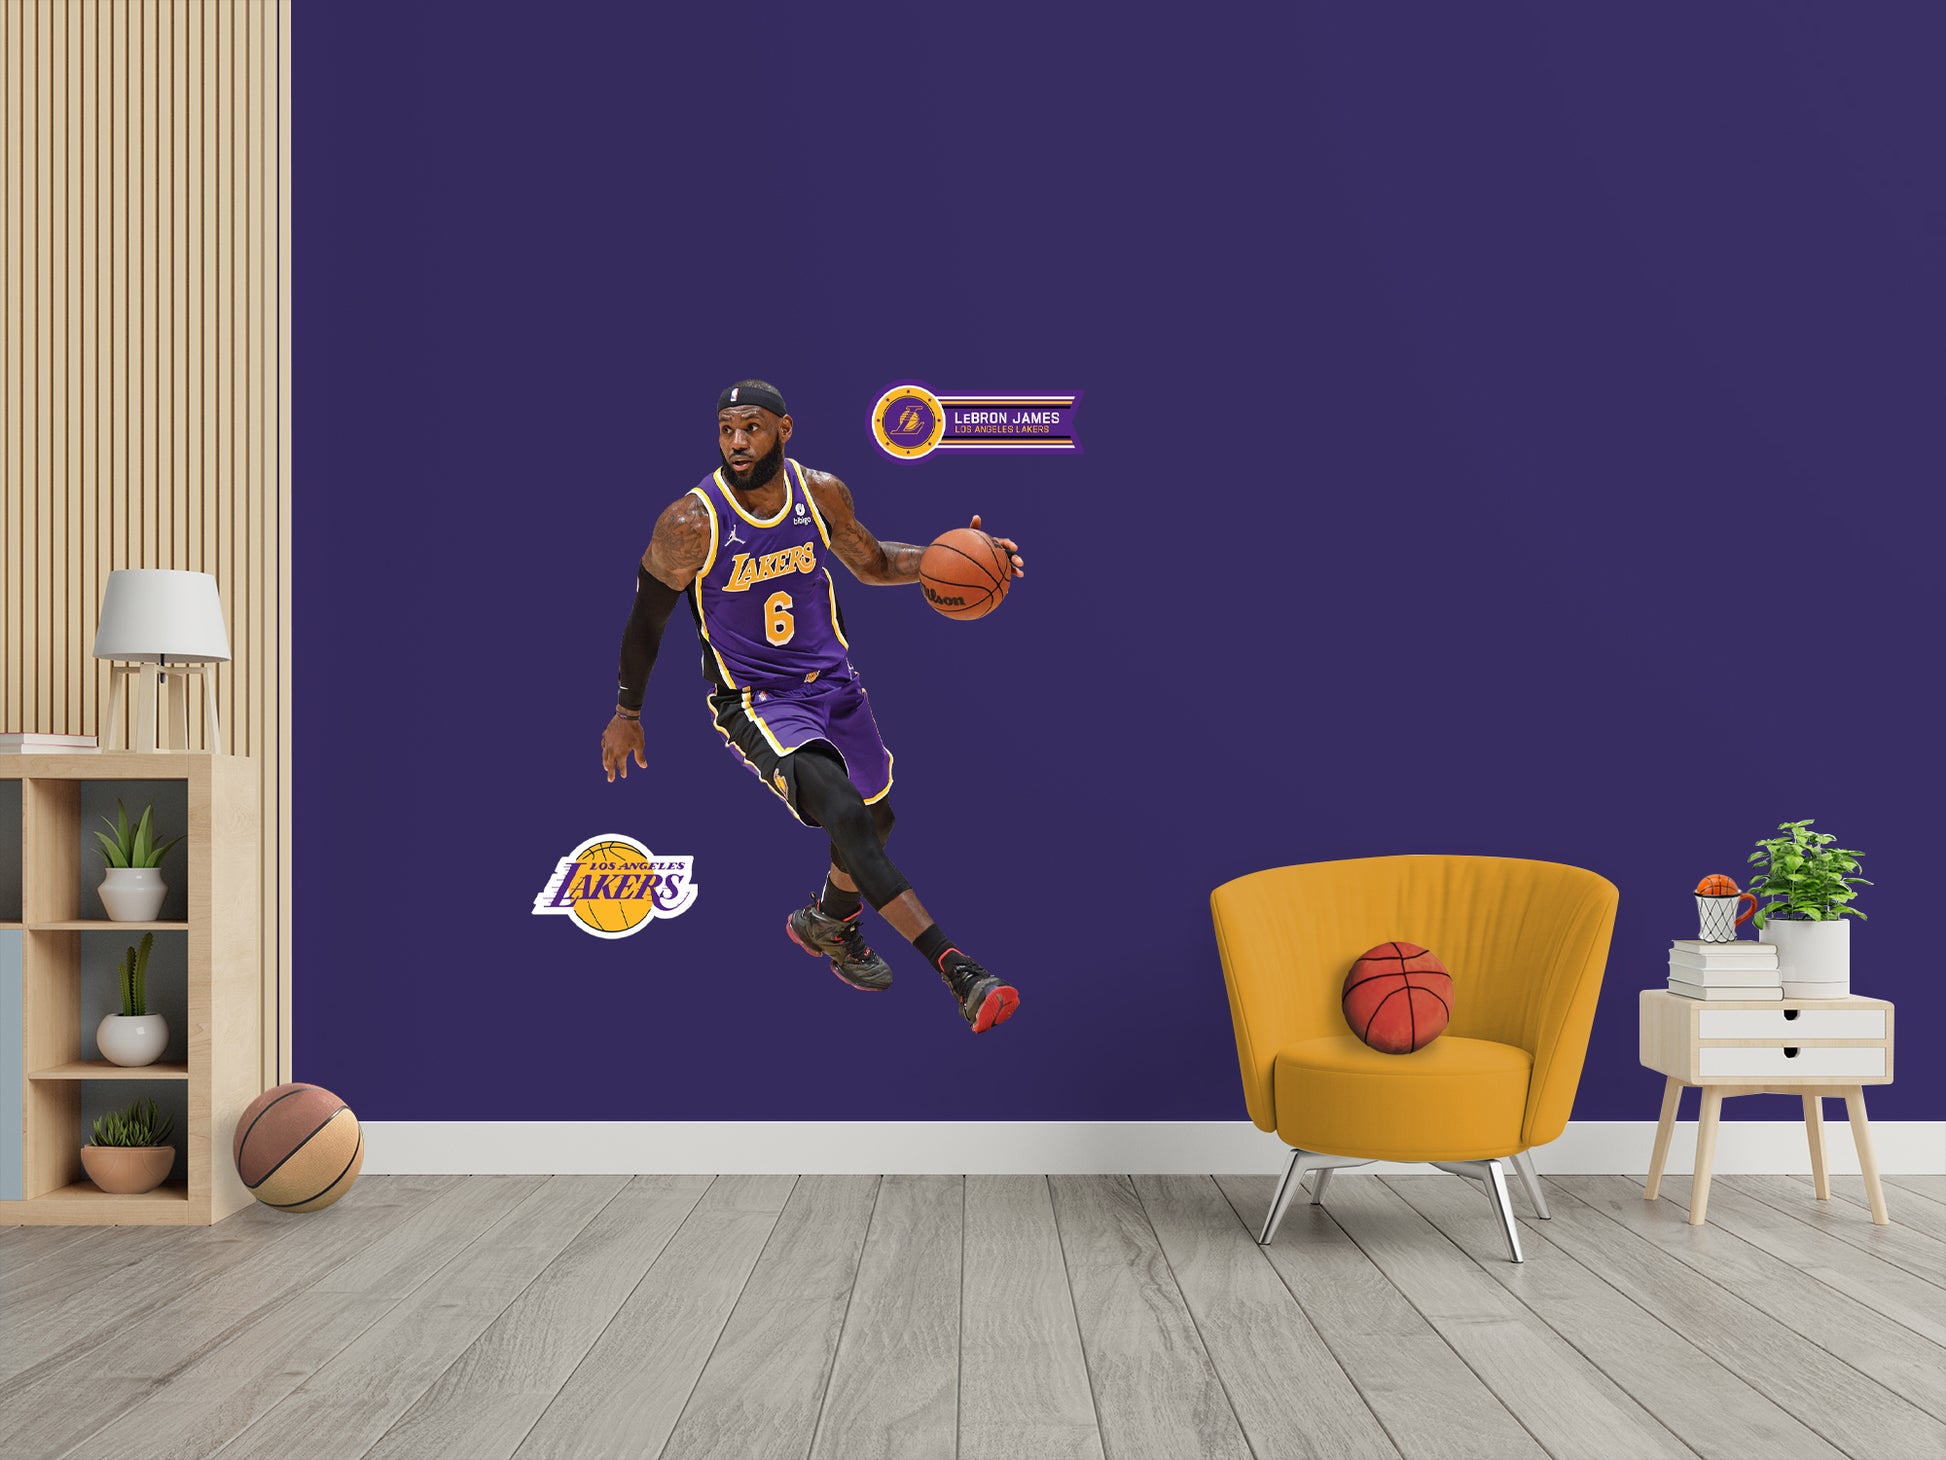 LeBron James 2021 Blue Jersey for Los Angeles Lakers - NBA Removable Wall Decal Large